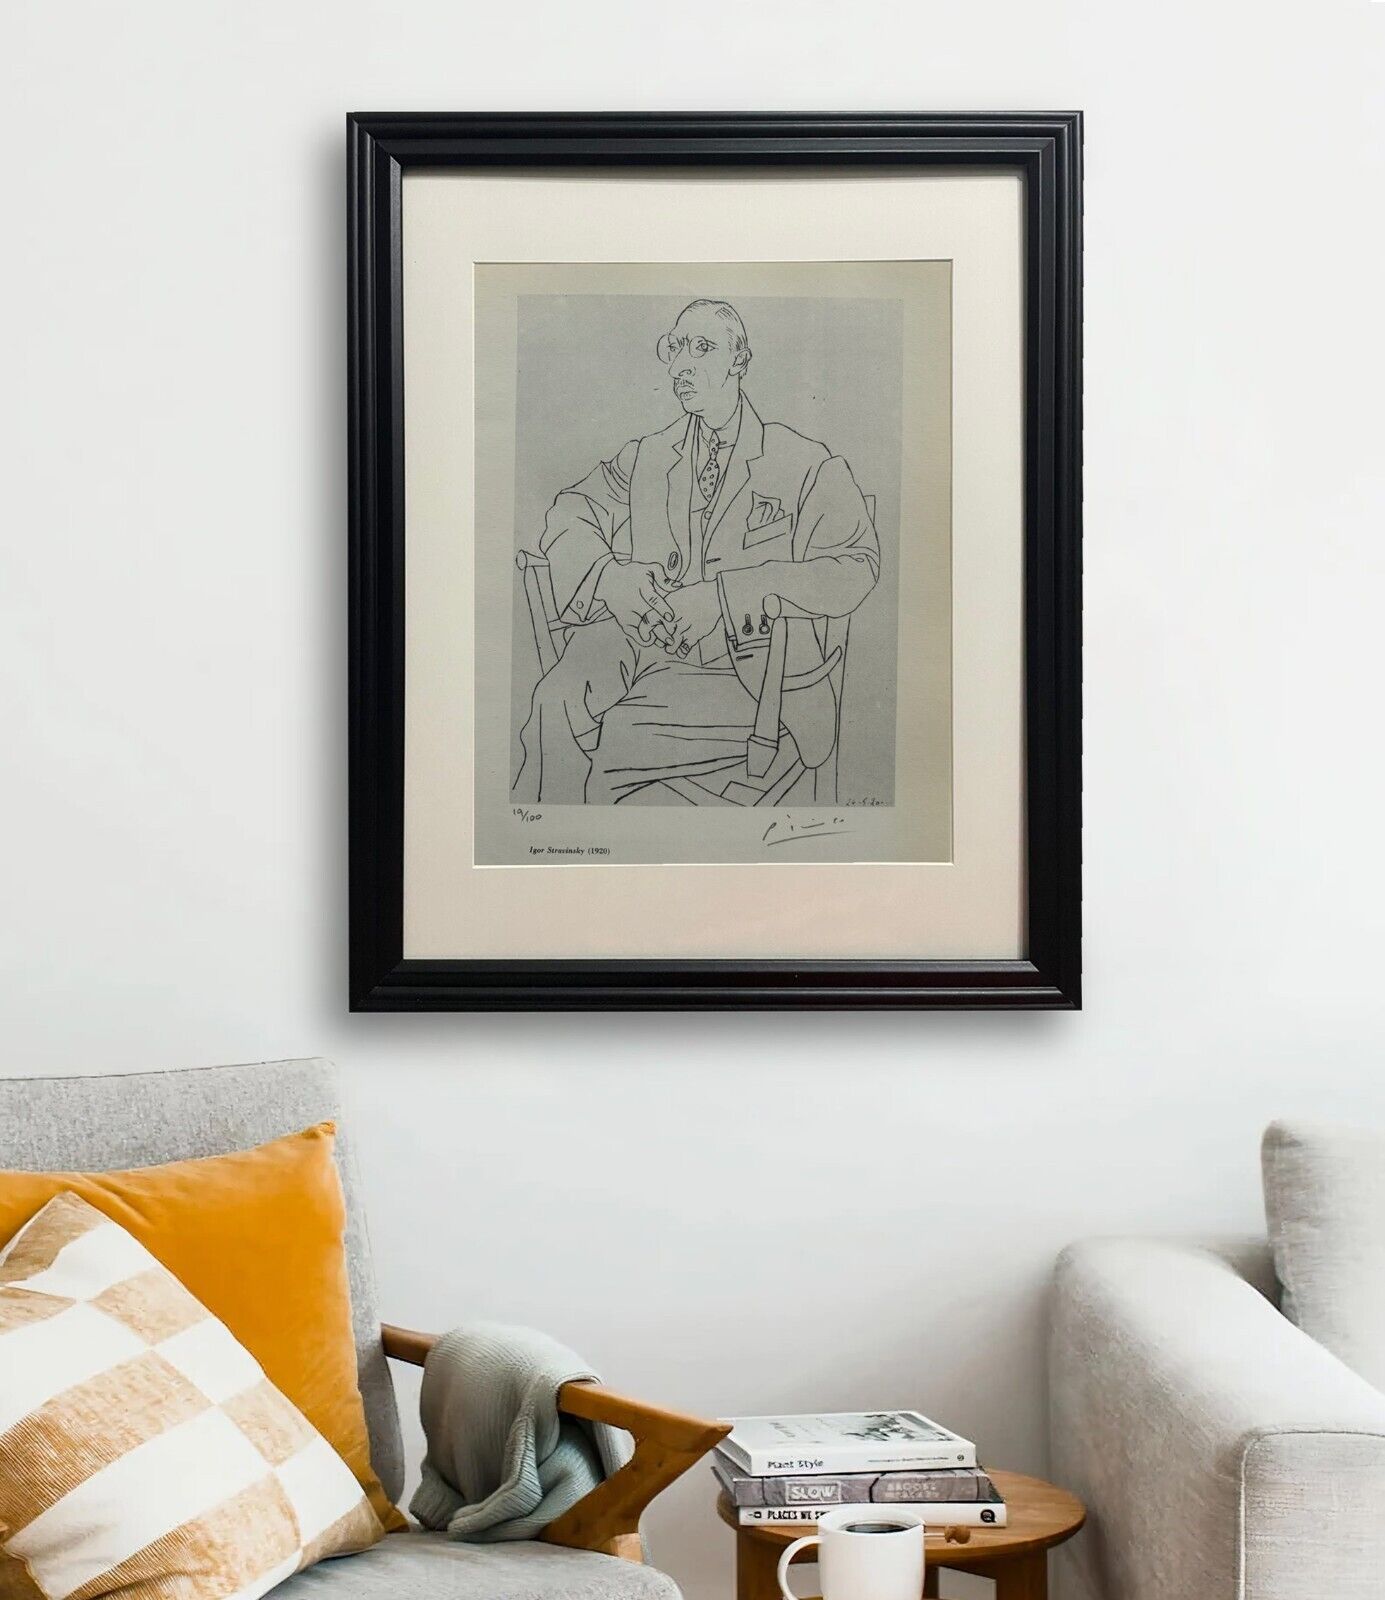 Pablo Picasso Hand-Signed Original Print With COA and +$3,500 USD Appraisal